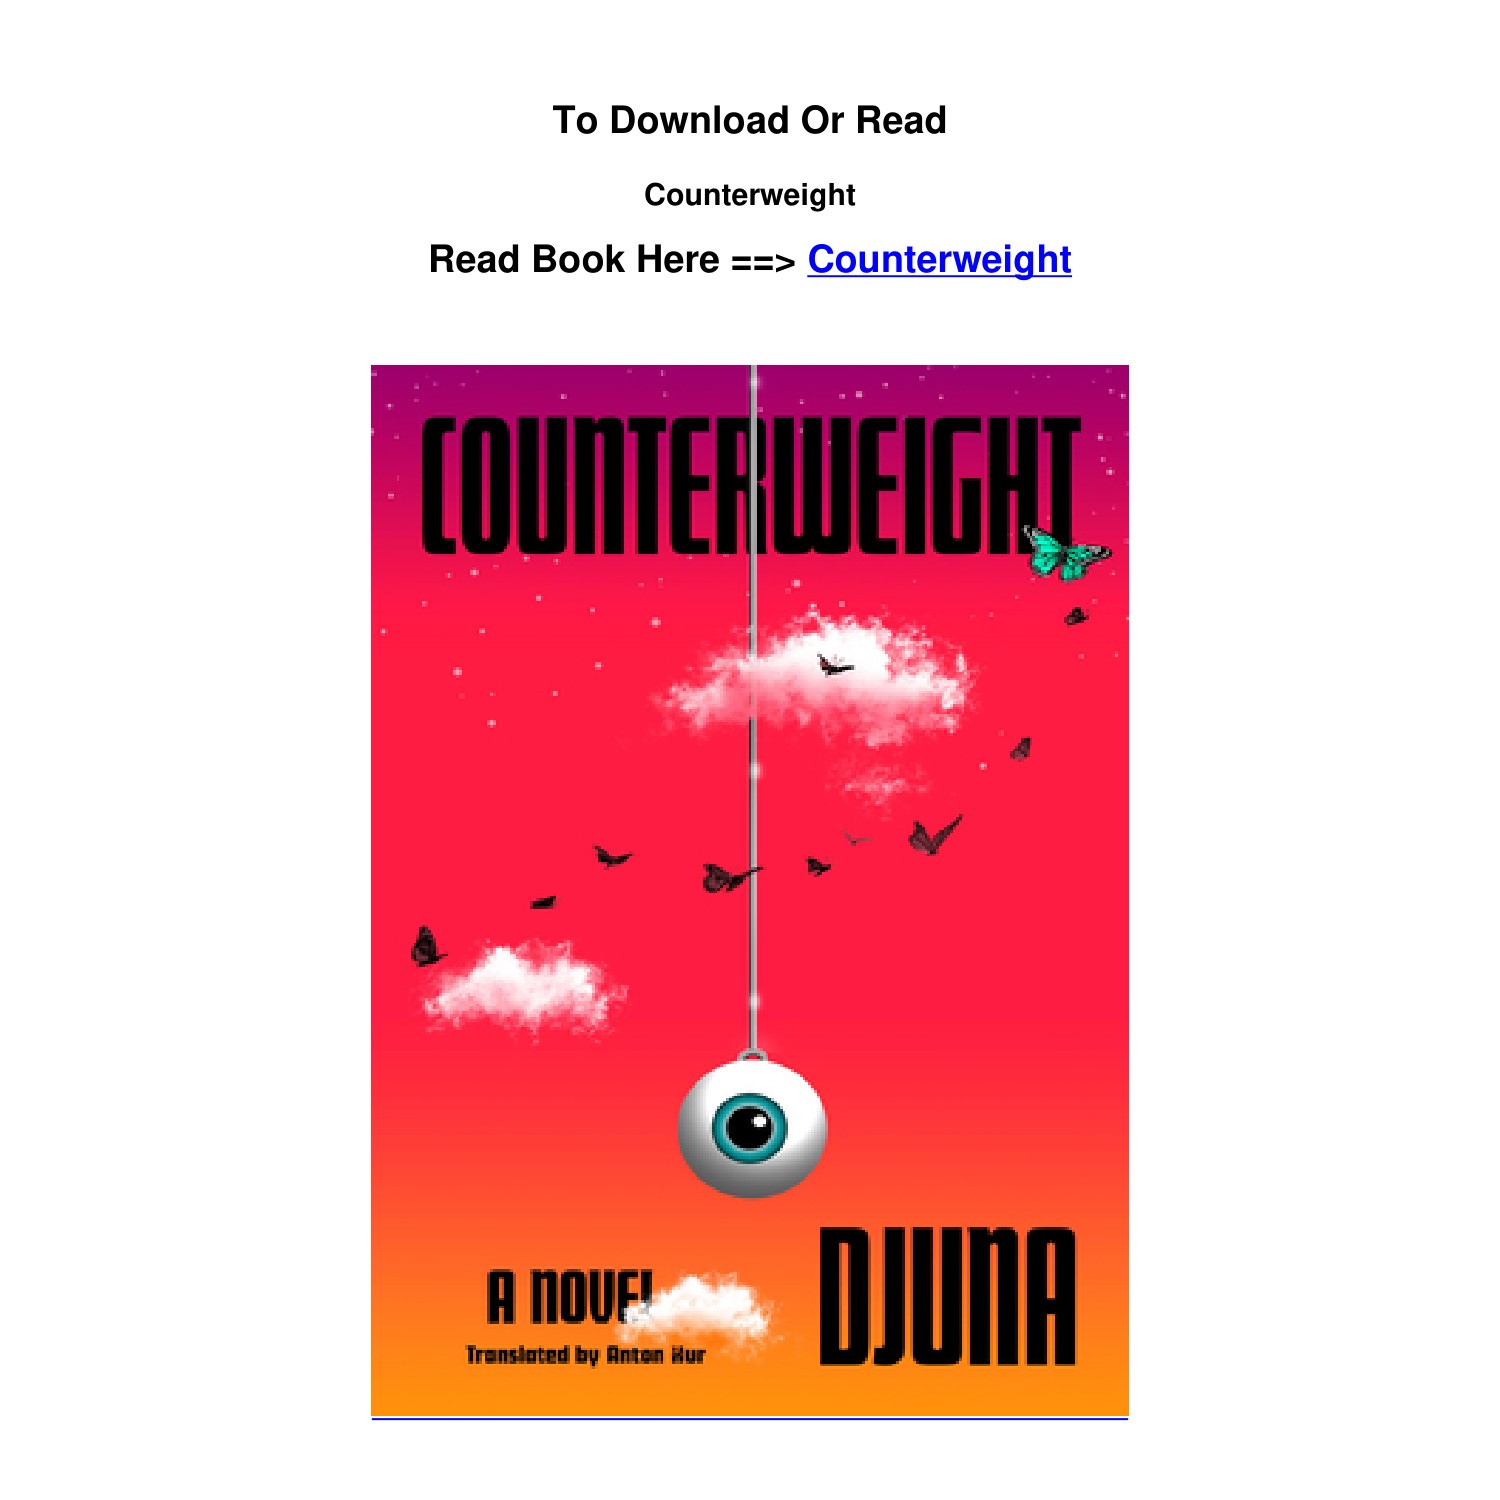 Download pdf Counterweight By Djuna.pdf | DocDroid